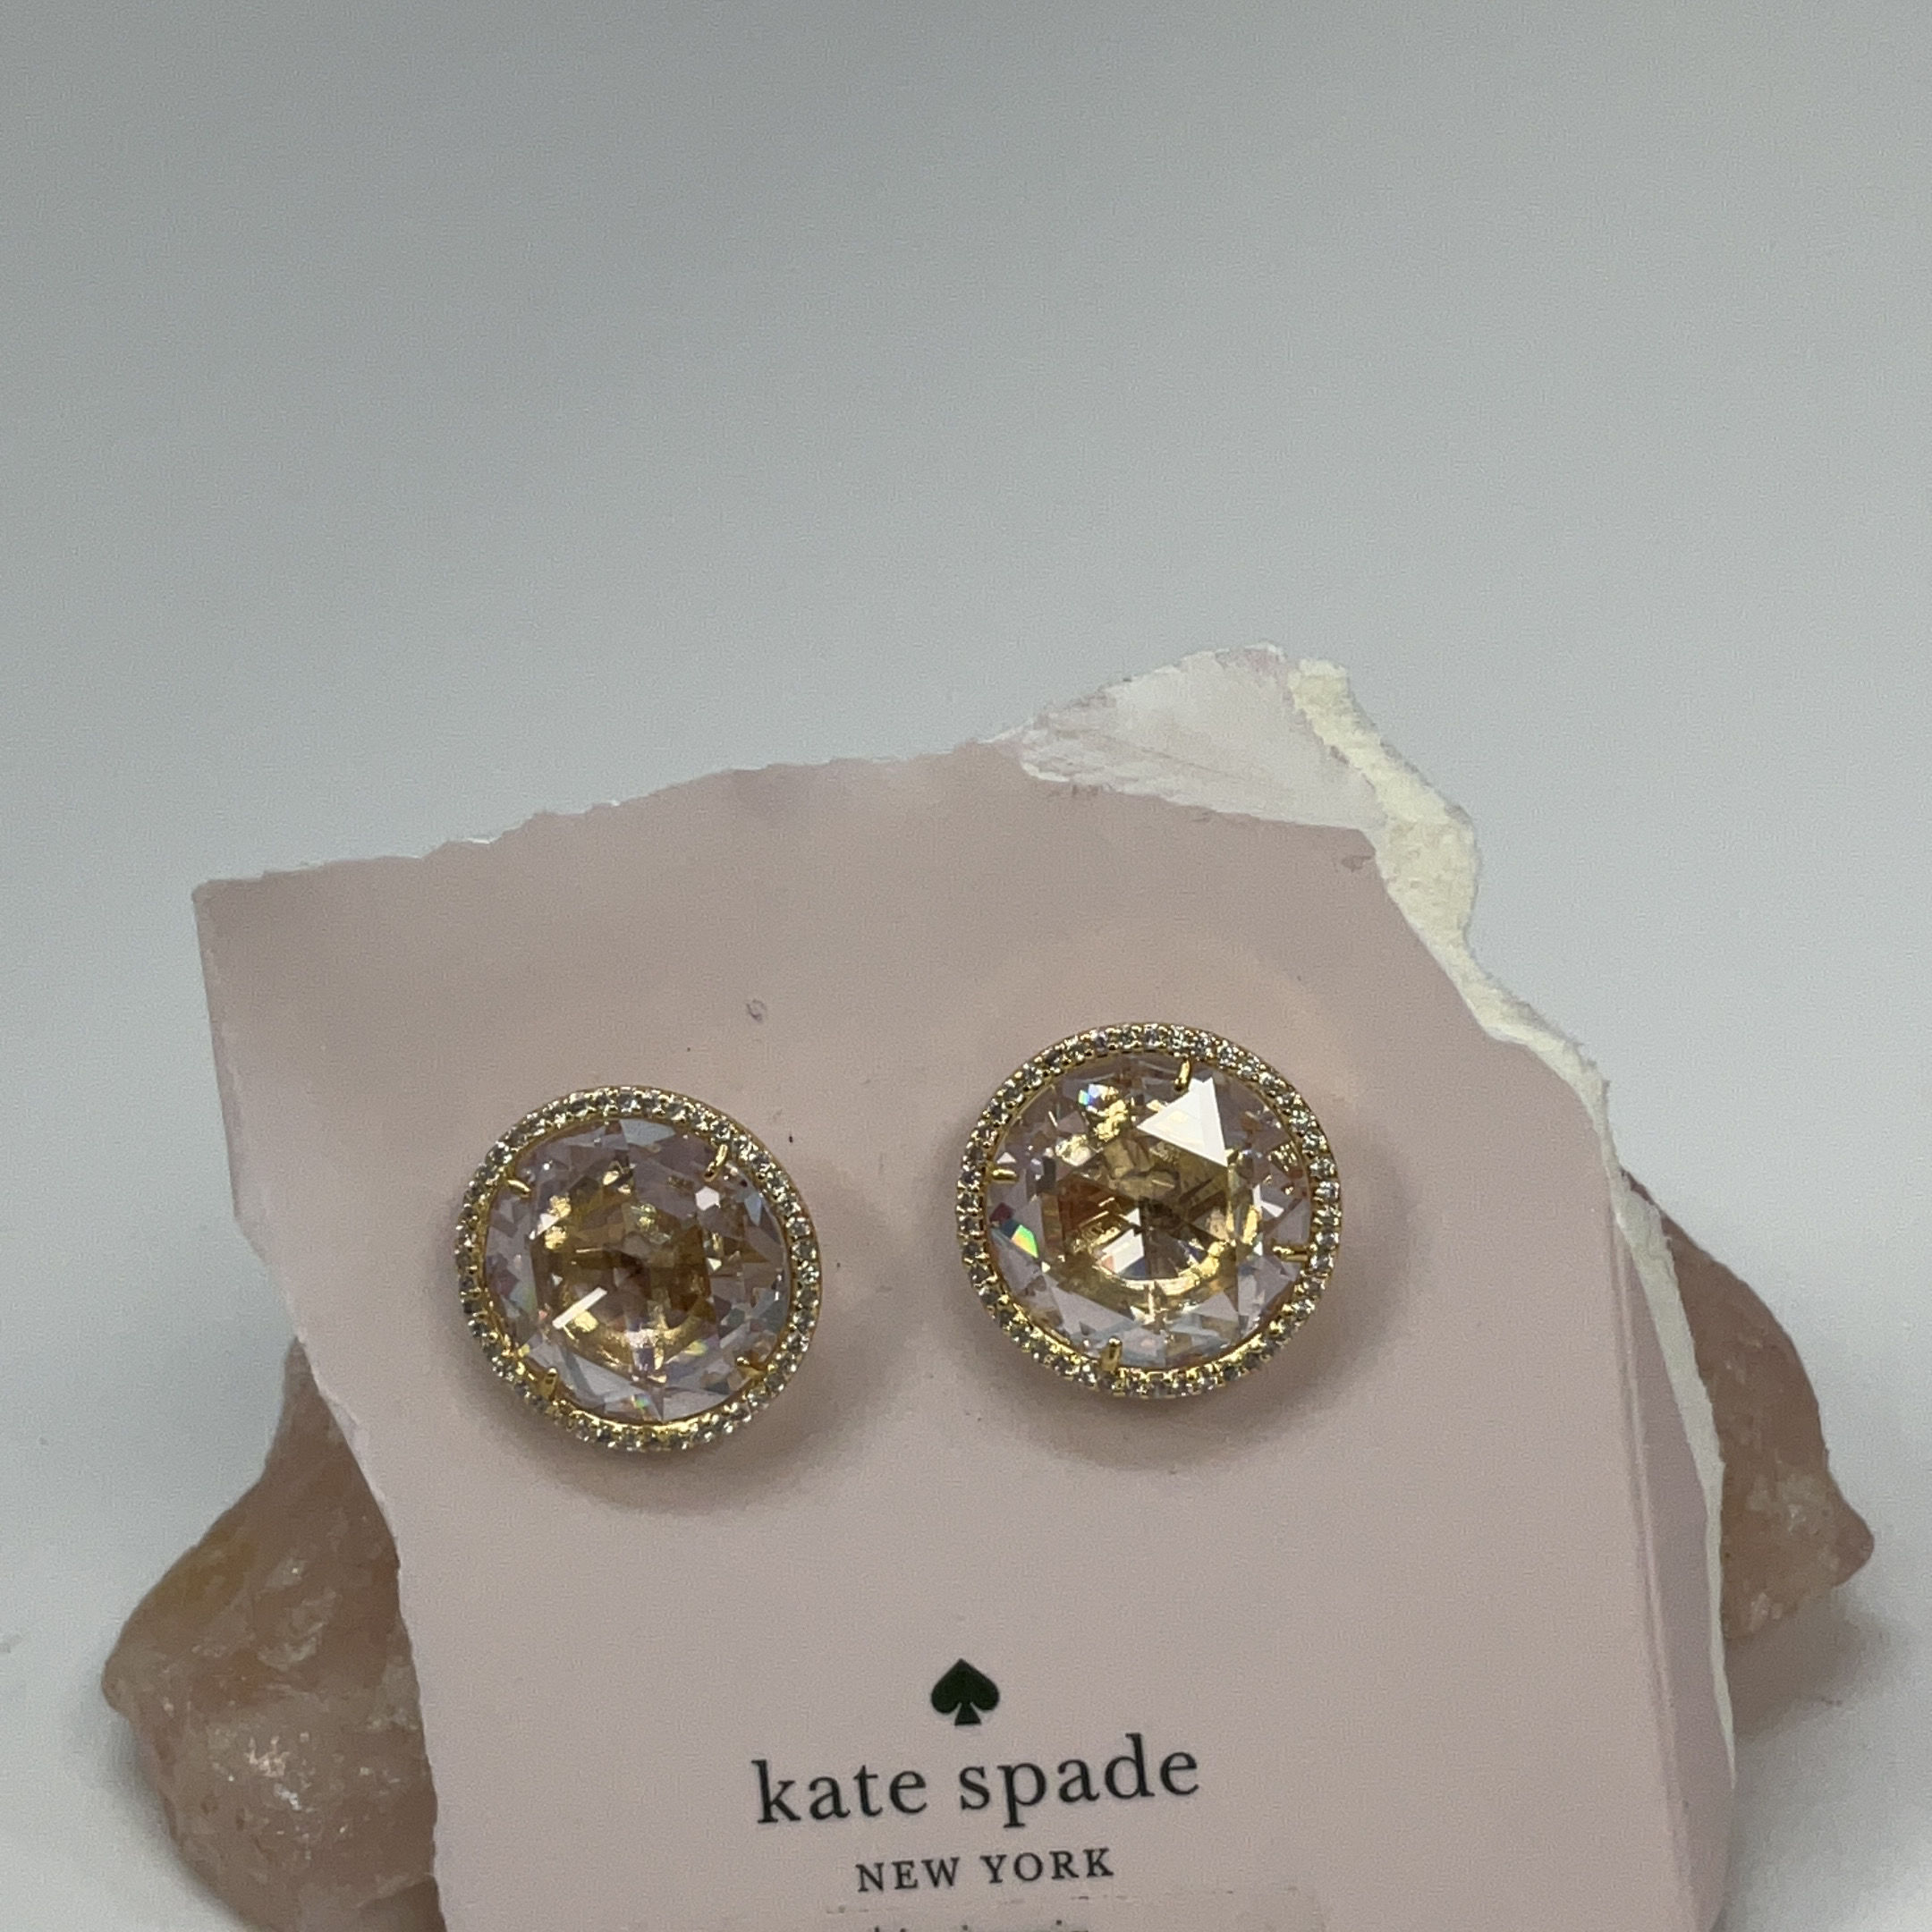 Kate spade Jewelry Unique Red CZ maple shaped stud earrings 14K Gold Plated  cute | eBay